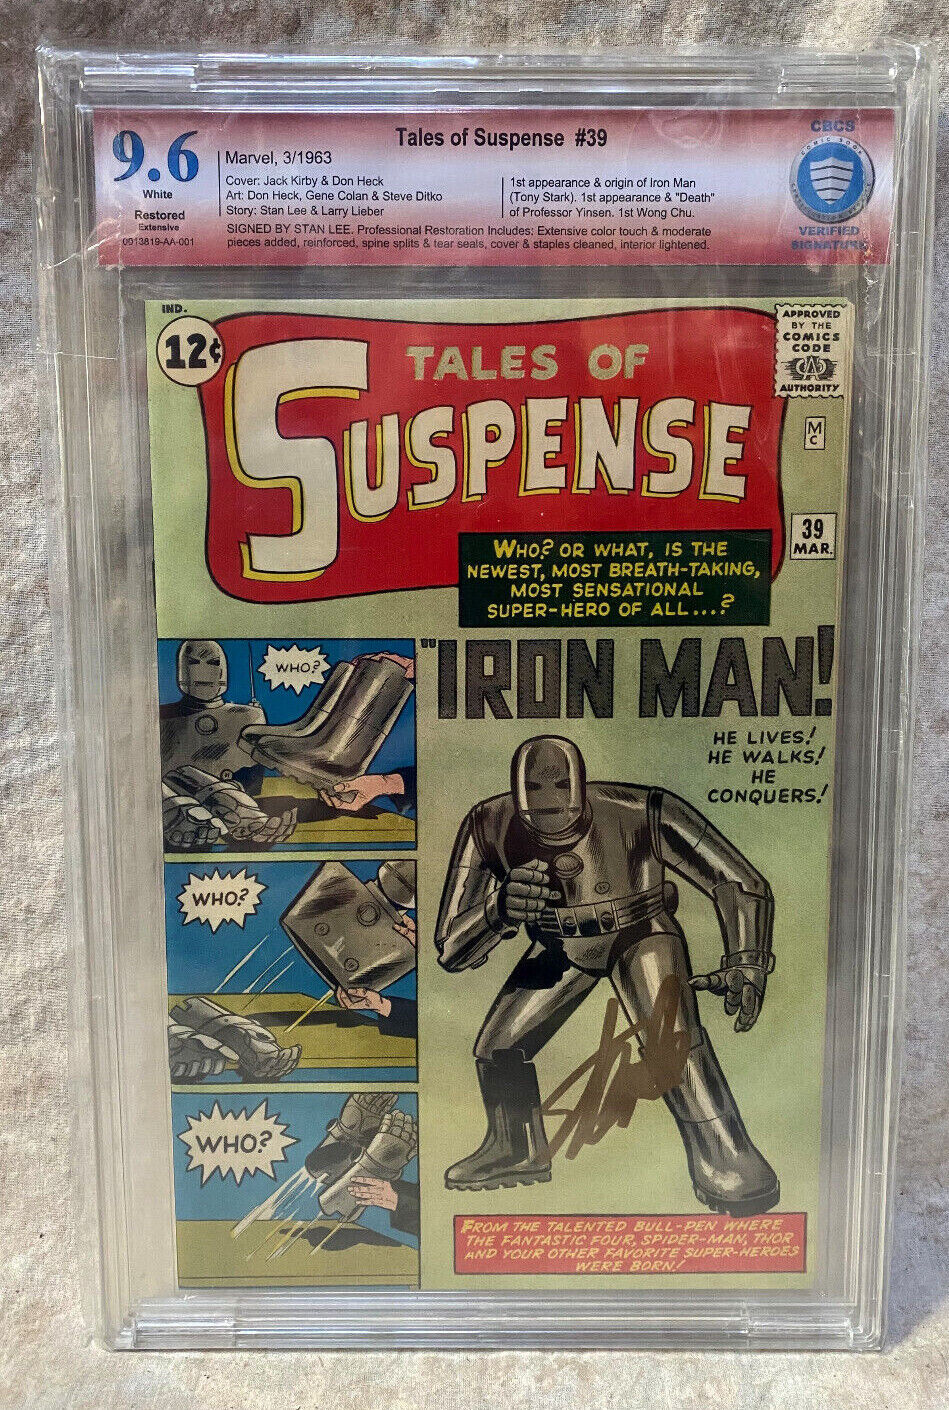 TALES OF SUSPENSE #39 (CBCS 9.6 Near Mint+) White Restored - Signed by Stan Lee